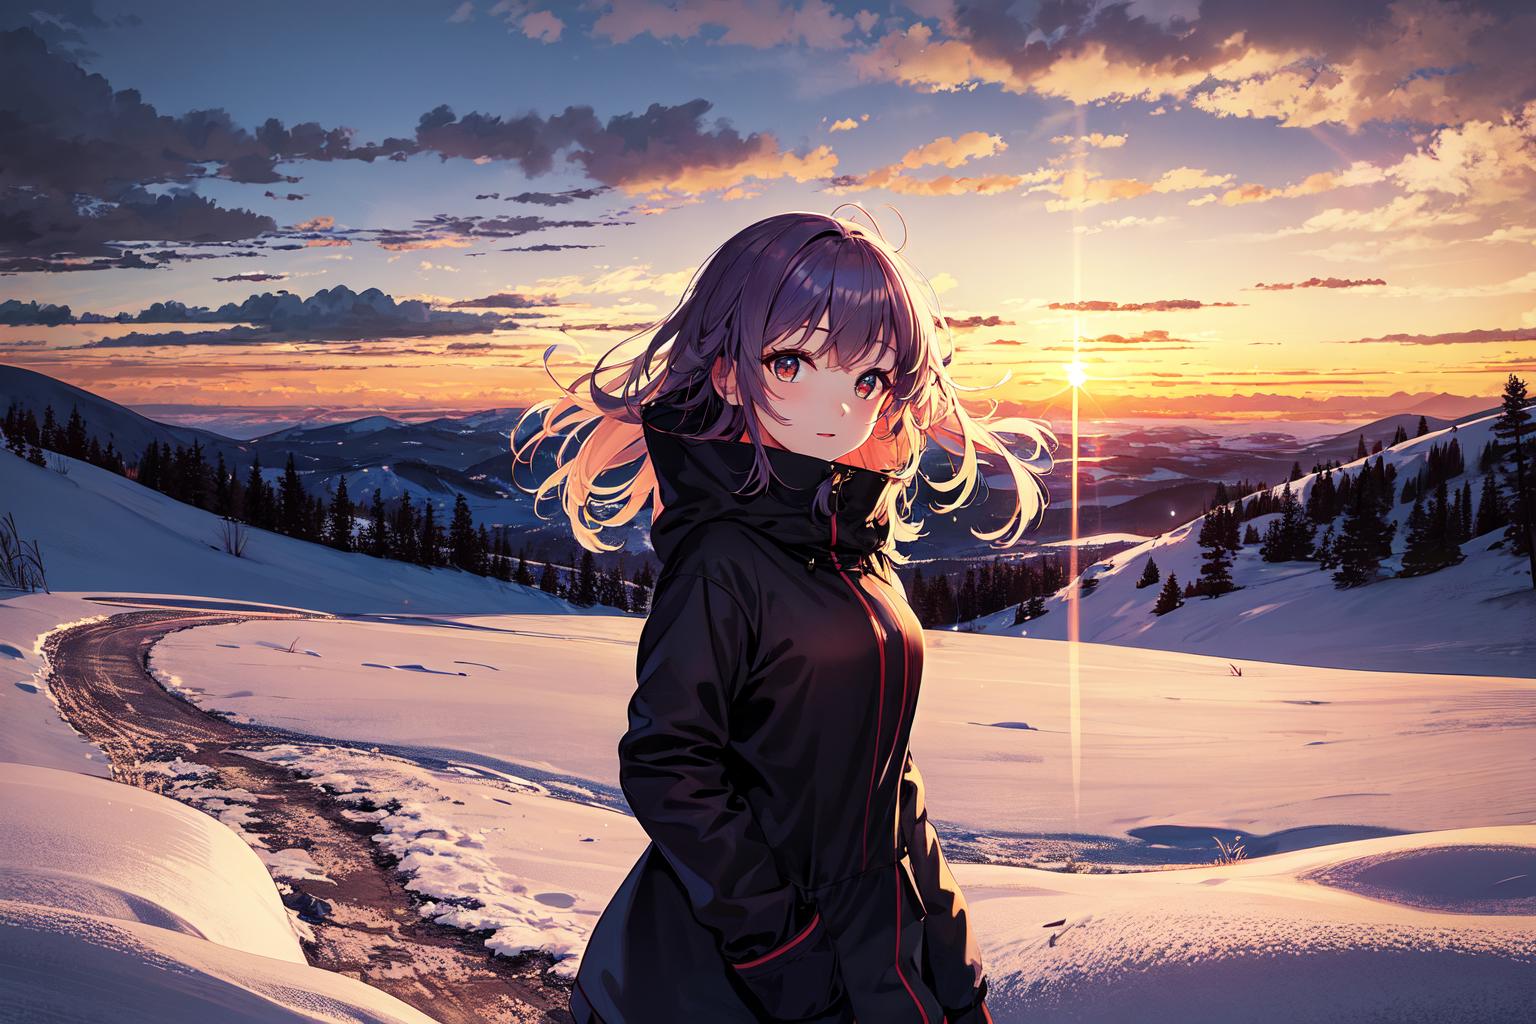 A woman with purple hair in a black jacket standing on a snowy mountain top.